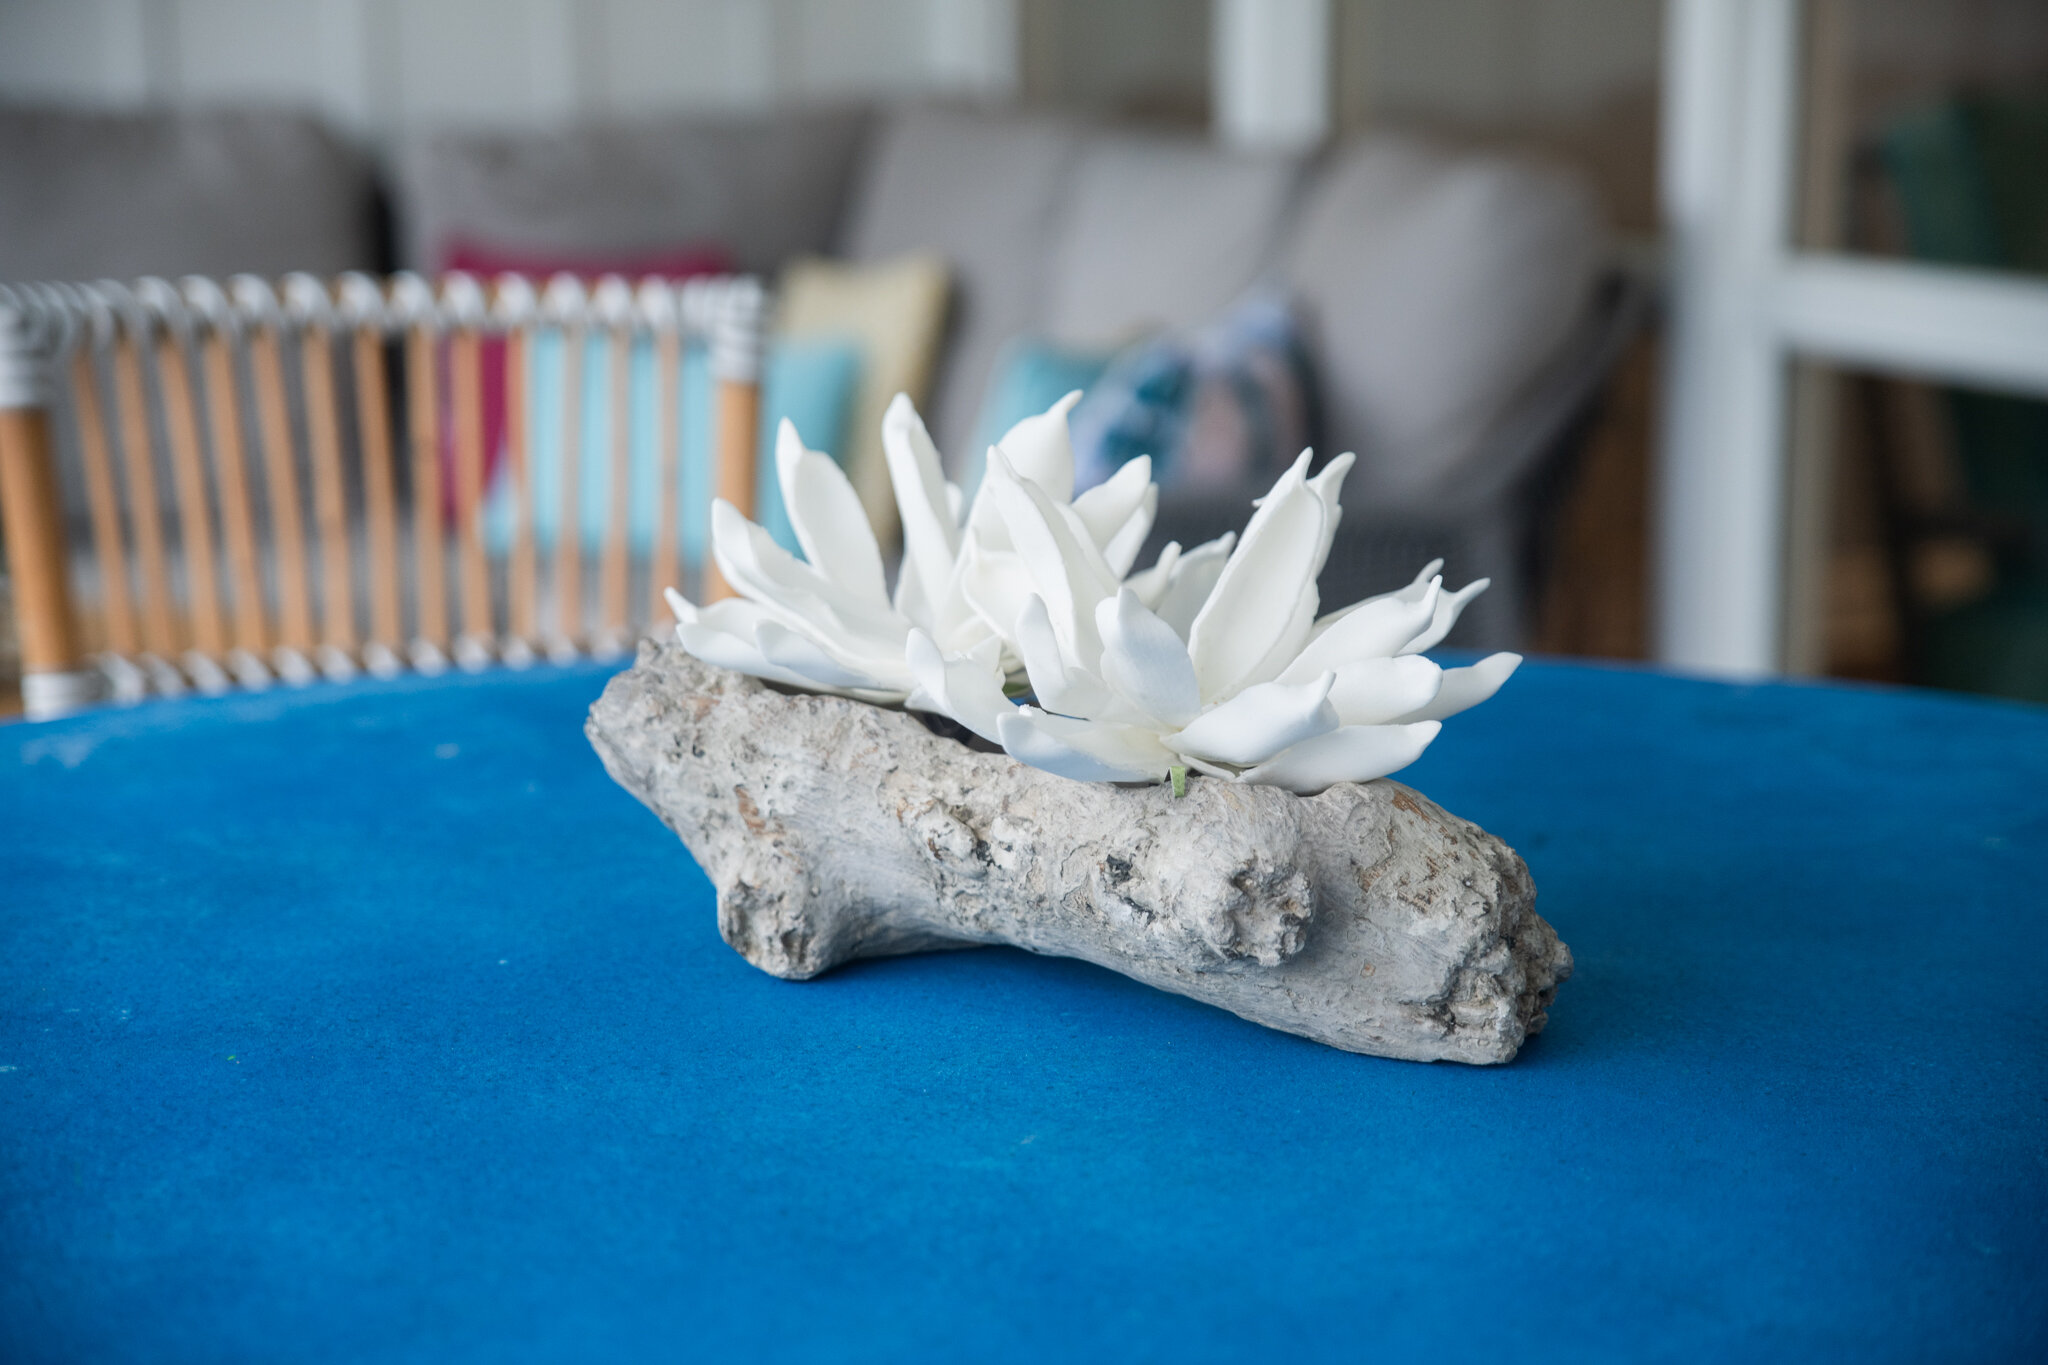 Dwell-Chic-Colorful-Coastal-Porch-Blue-Table-Detail-And-Driftwood-Accessory.jpg